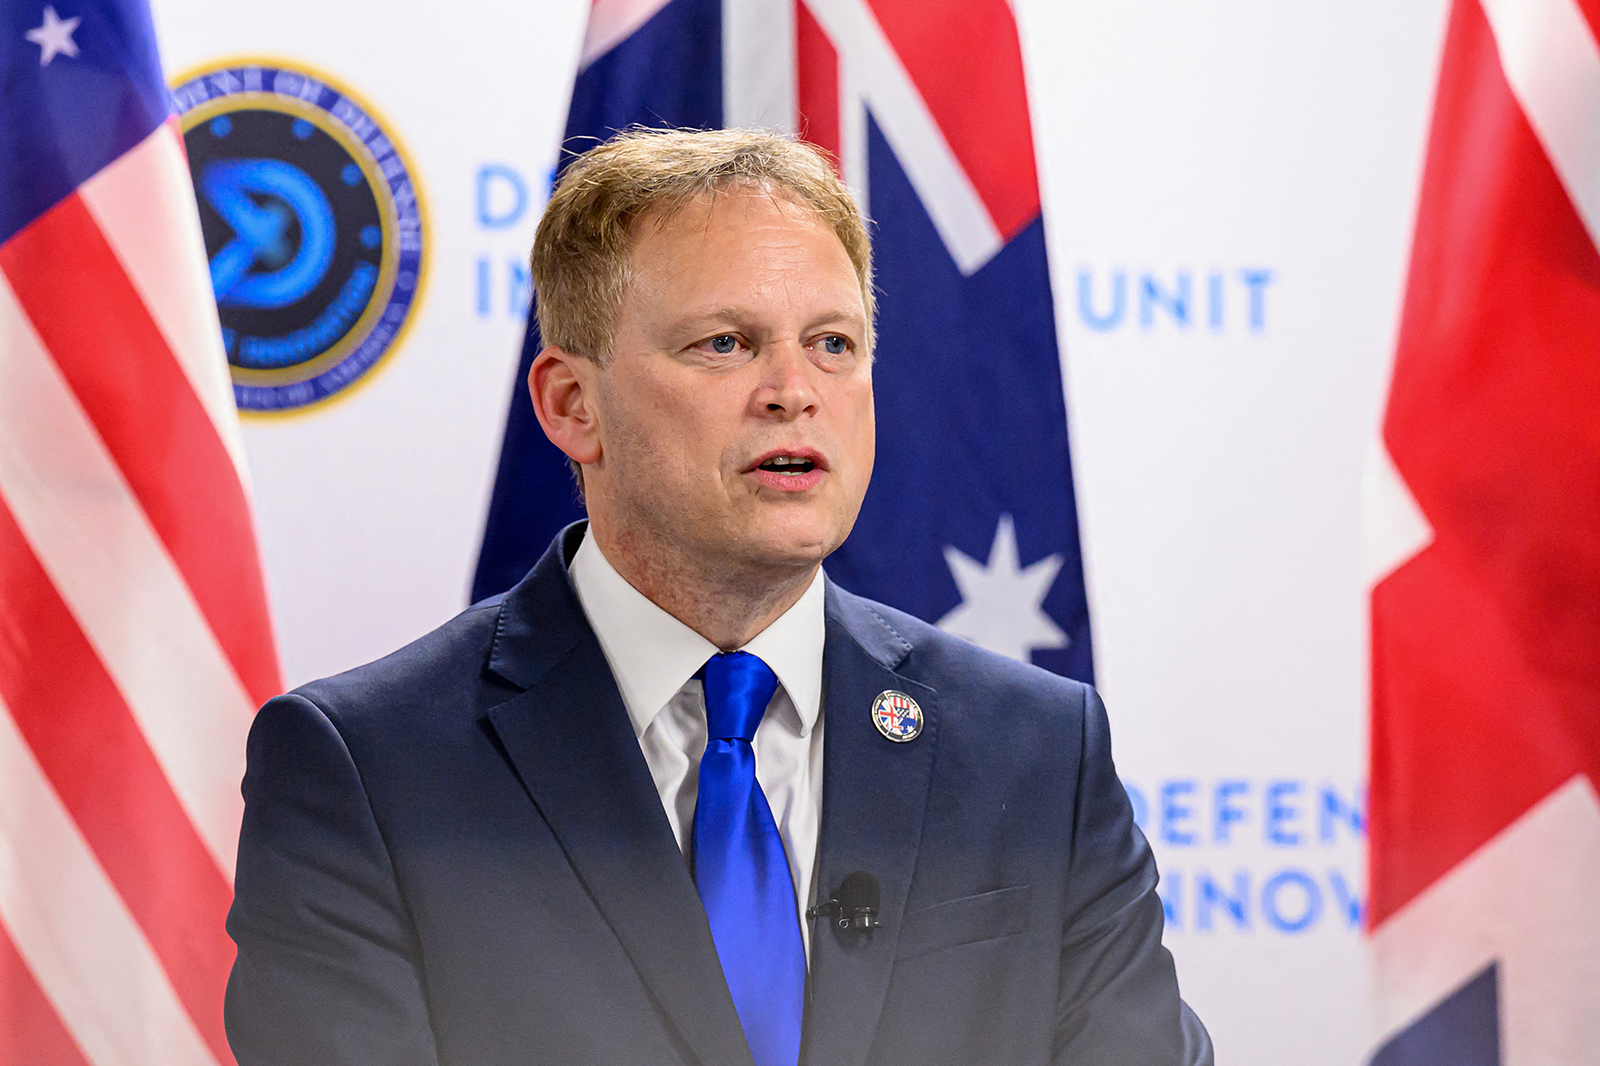 Grant Shapps speaks during a joint press conference in Mountain View, California, on December 1.